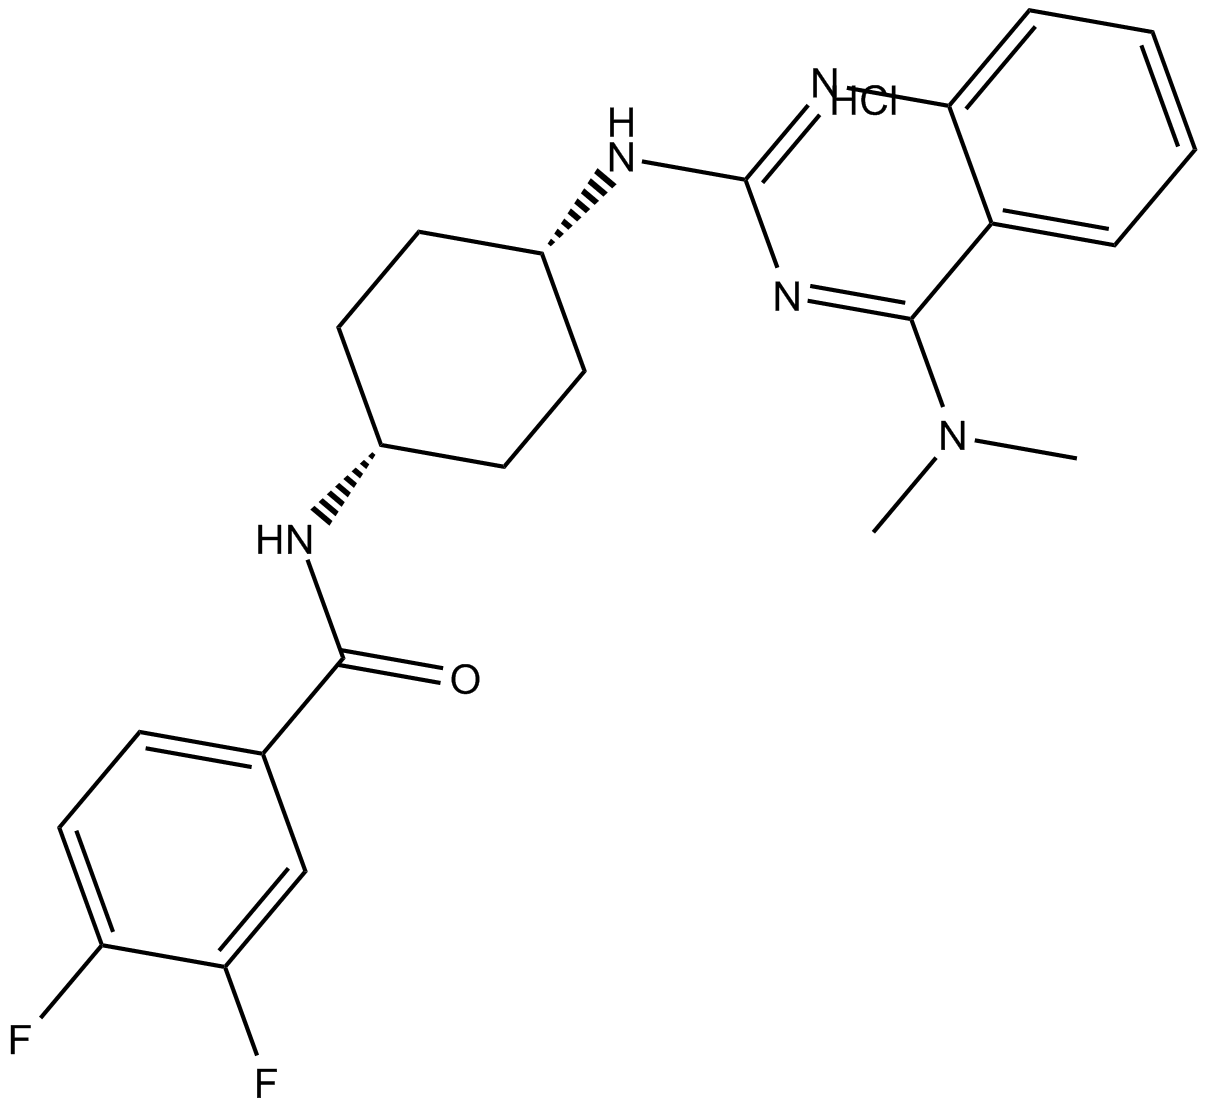 ATC 0175 hydrochloride  Chemical Structure